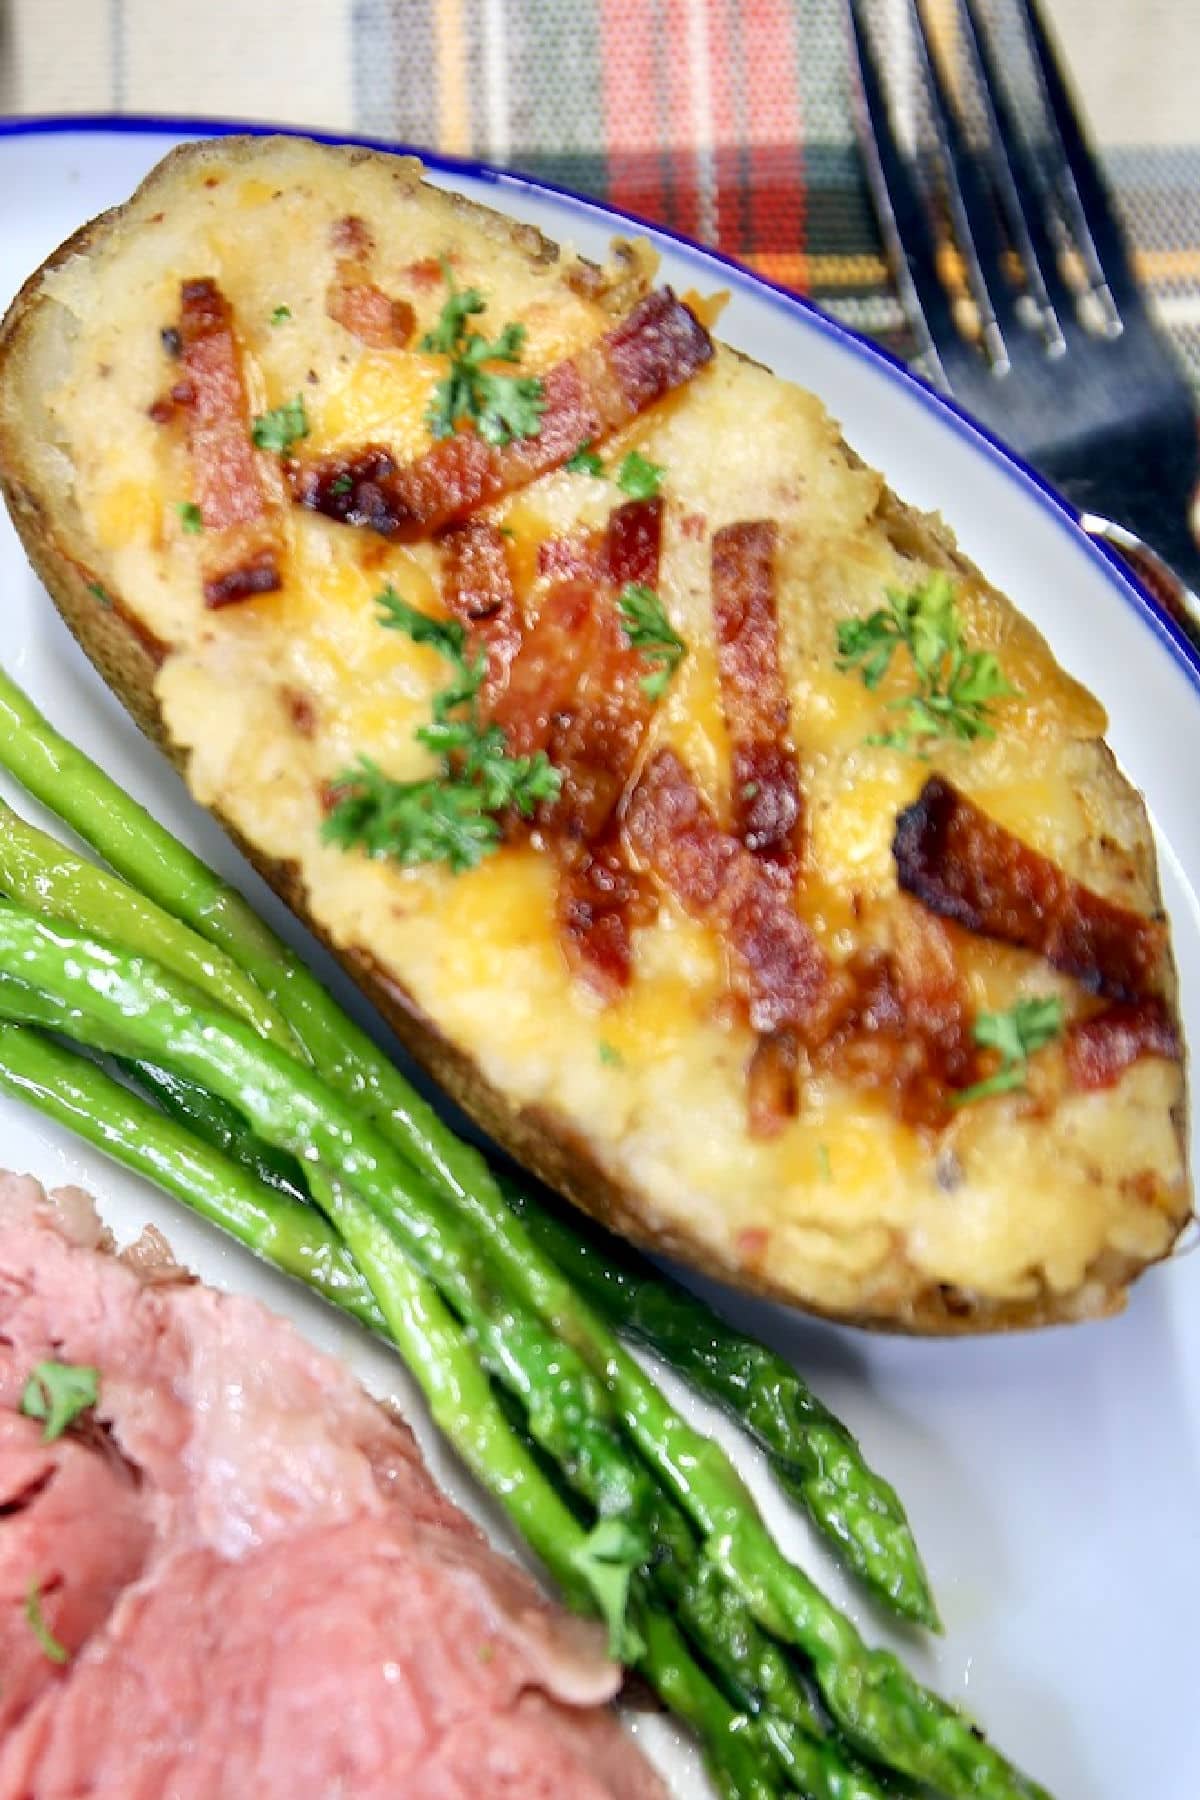 Twice baked potato with bacon.